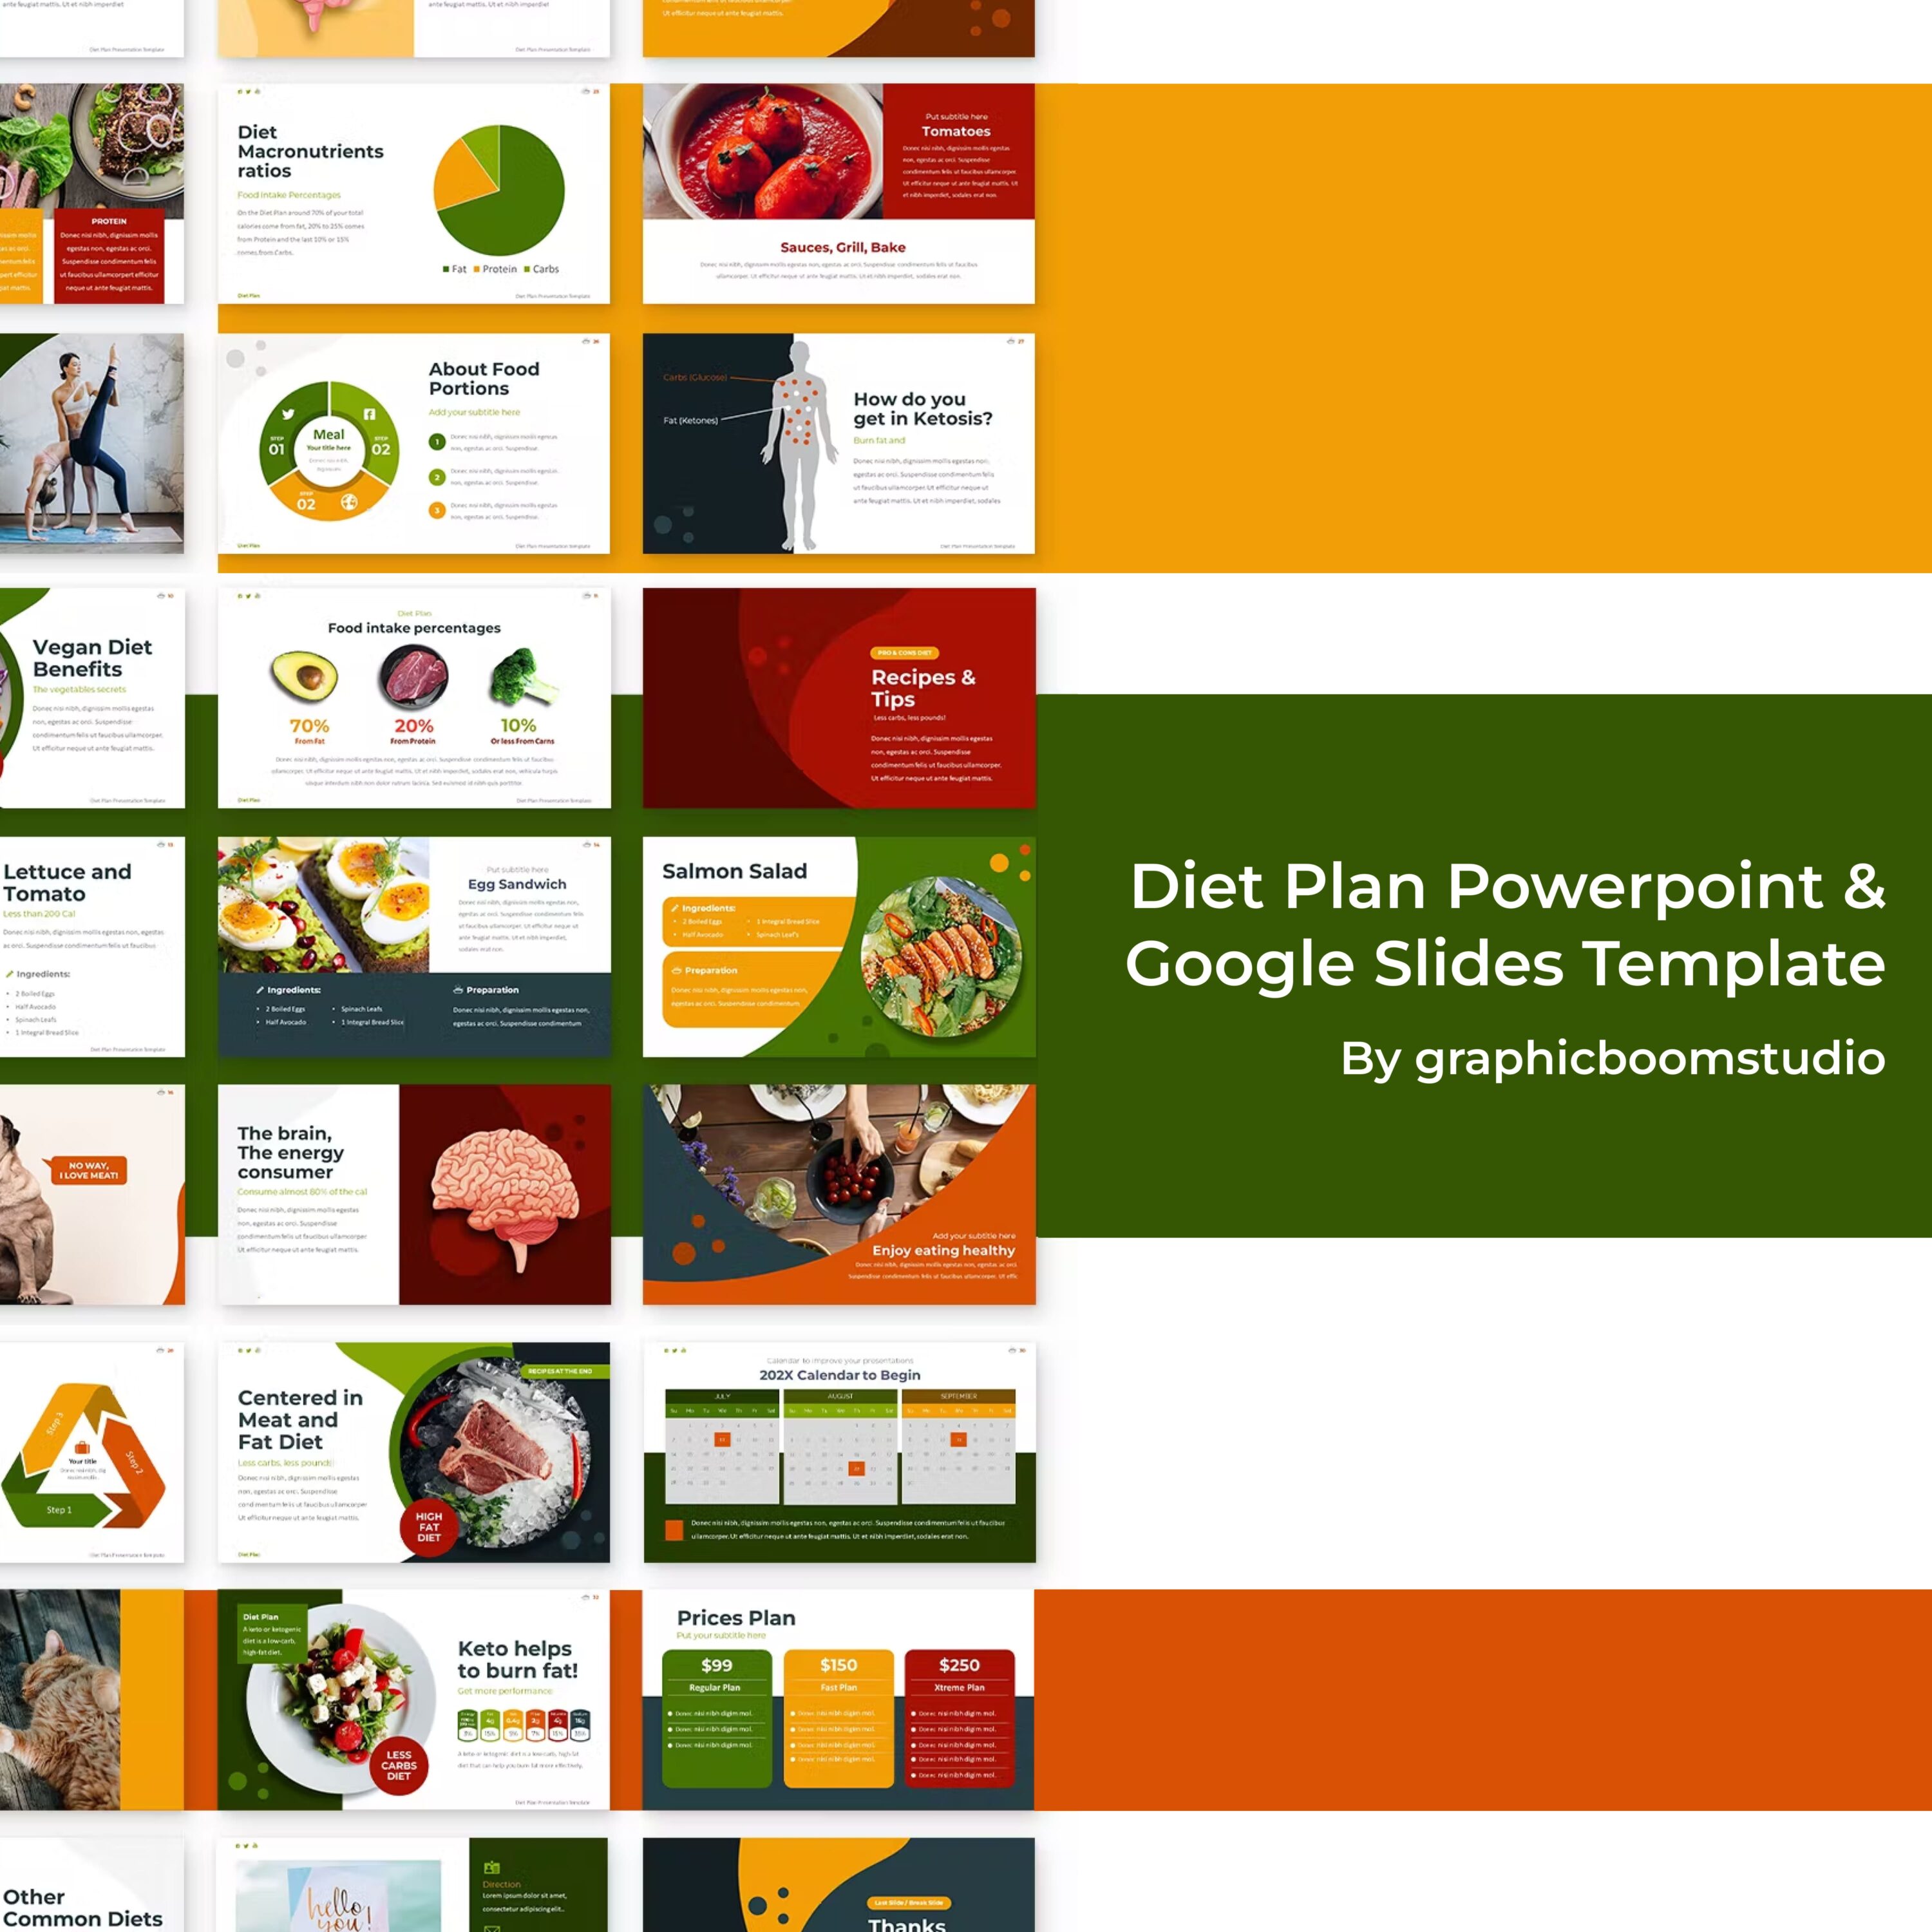 Diet Plan Powerpoint & Google Slides Template - main image preview.